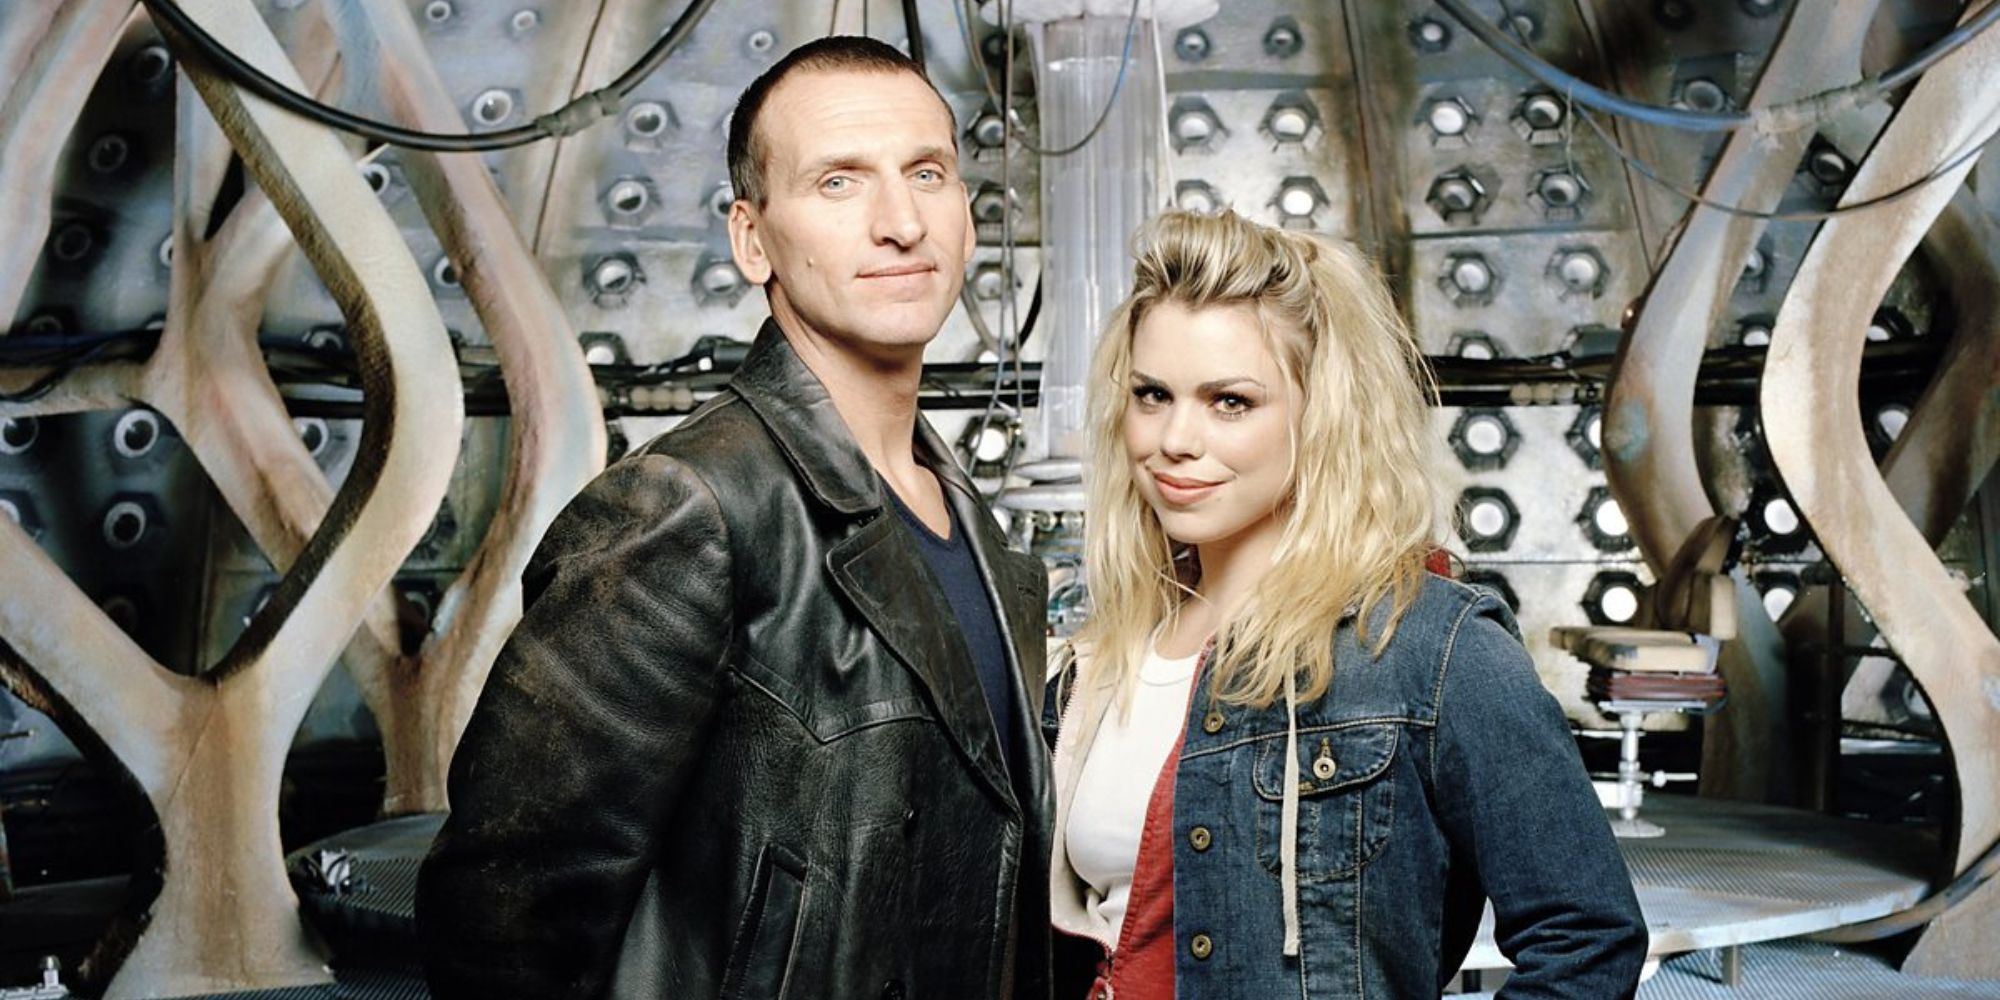 Rose Tyler (Billie Piper) and the Ninth Doctor (Christopher Eccleston) in the TARDIS on Doctor Who